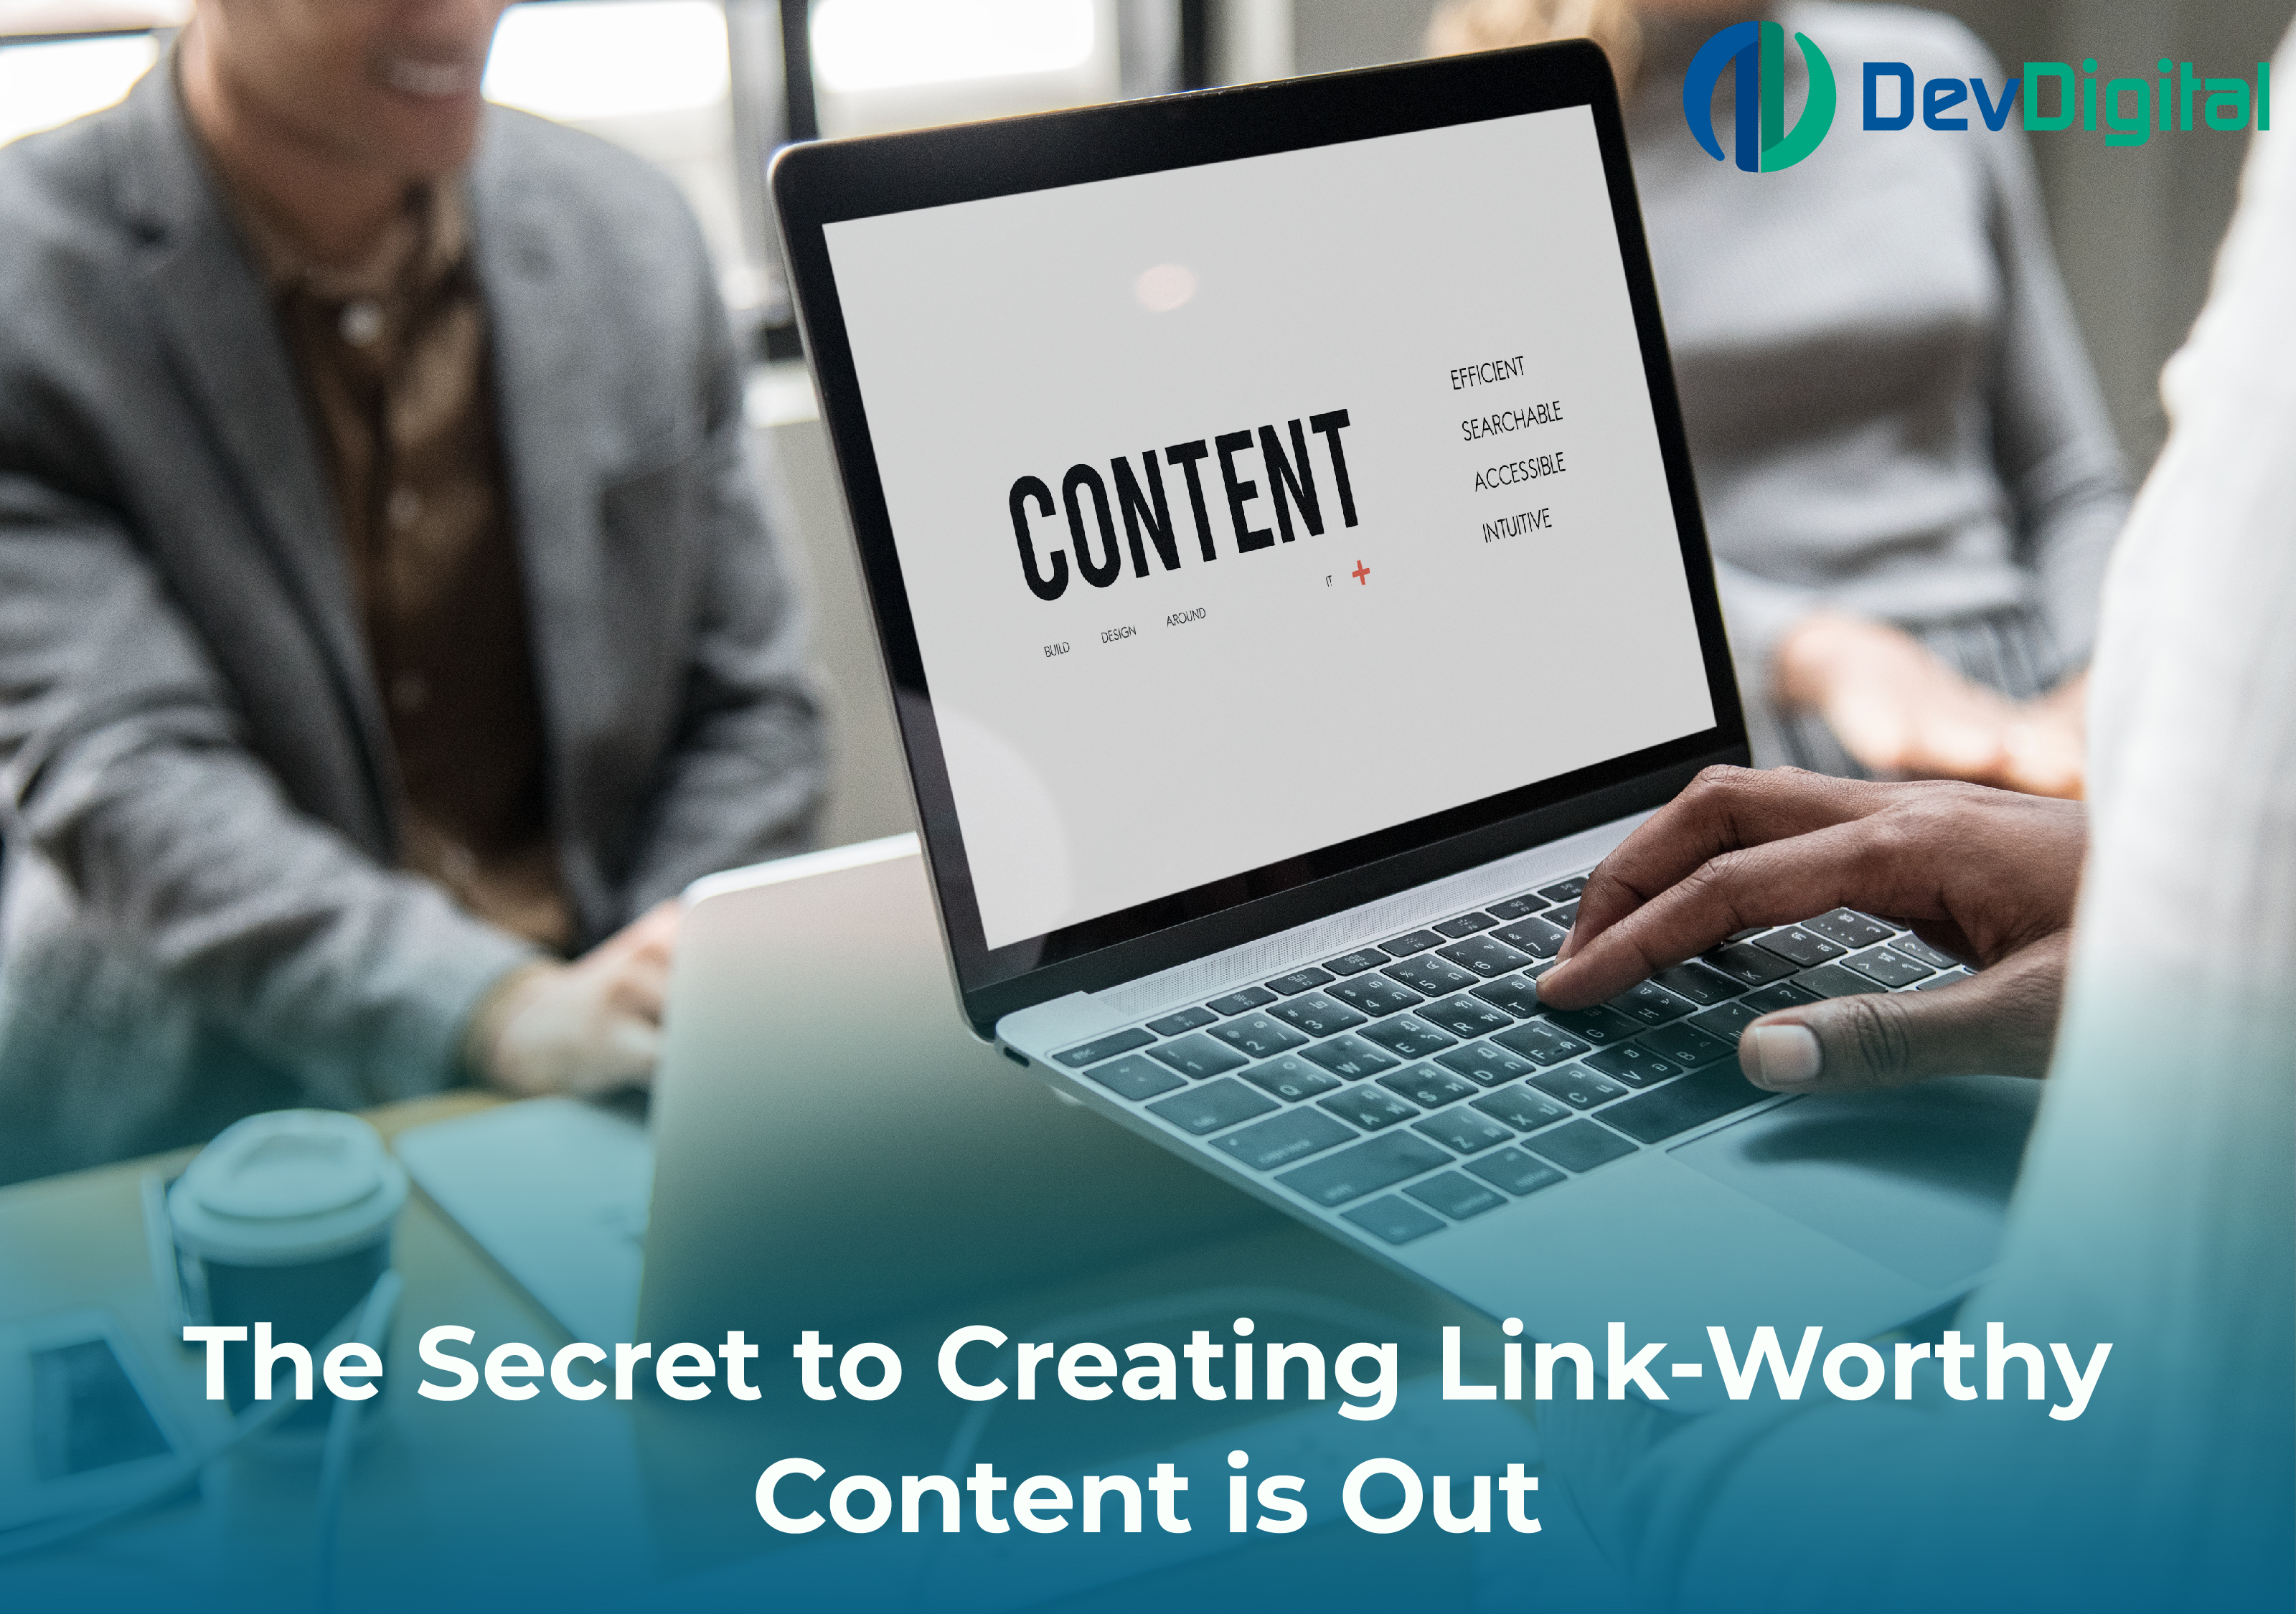 The Secret to Creating Link-Worthy Content is Out